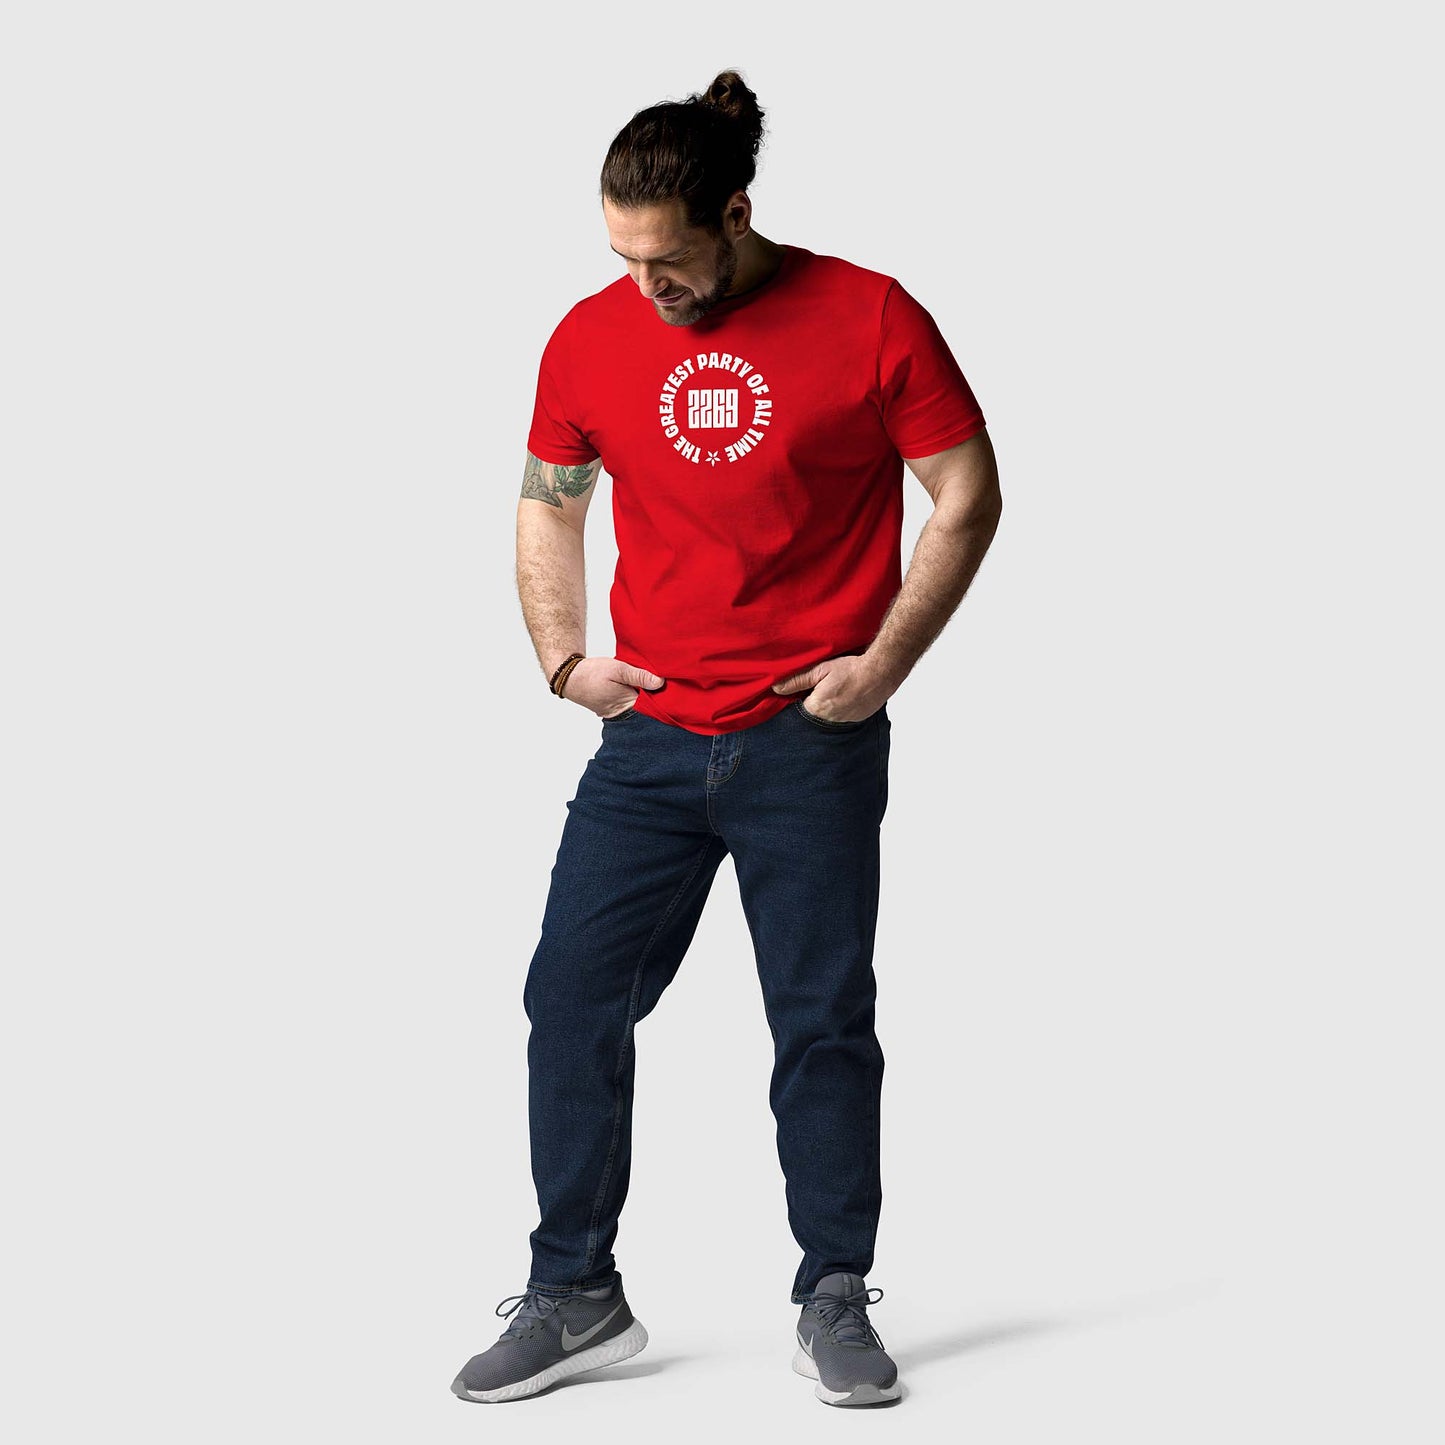 Unisex red organic cotton t-shirt with English 2269 party circle